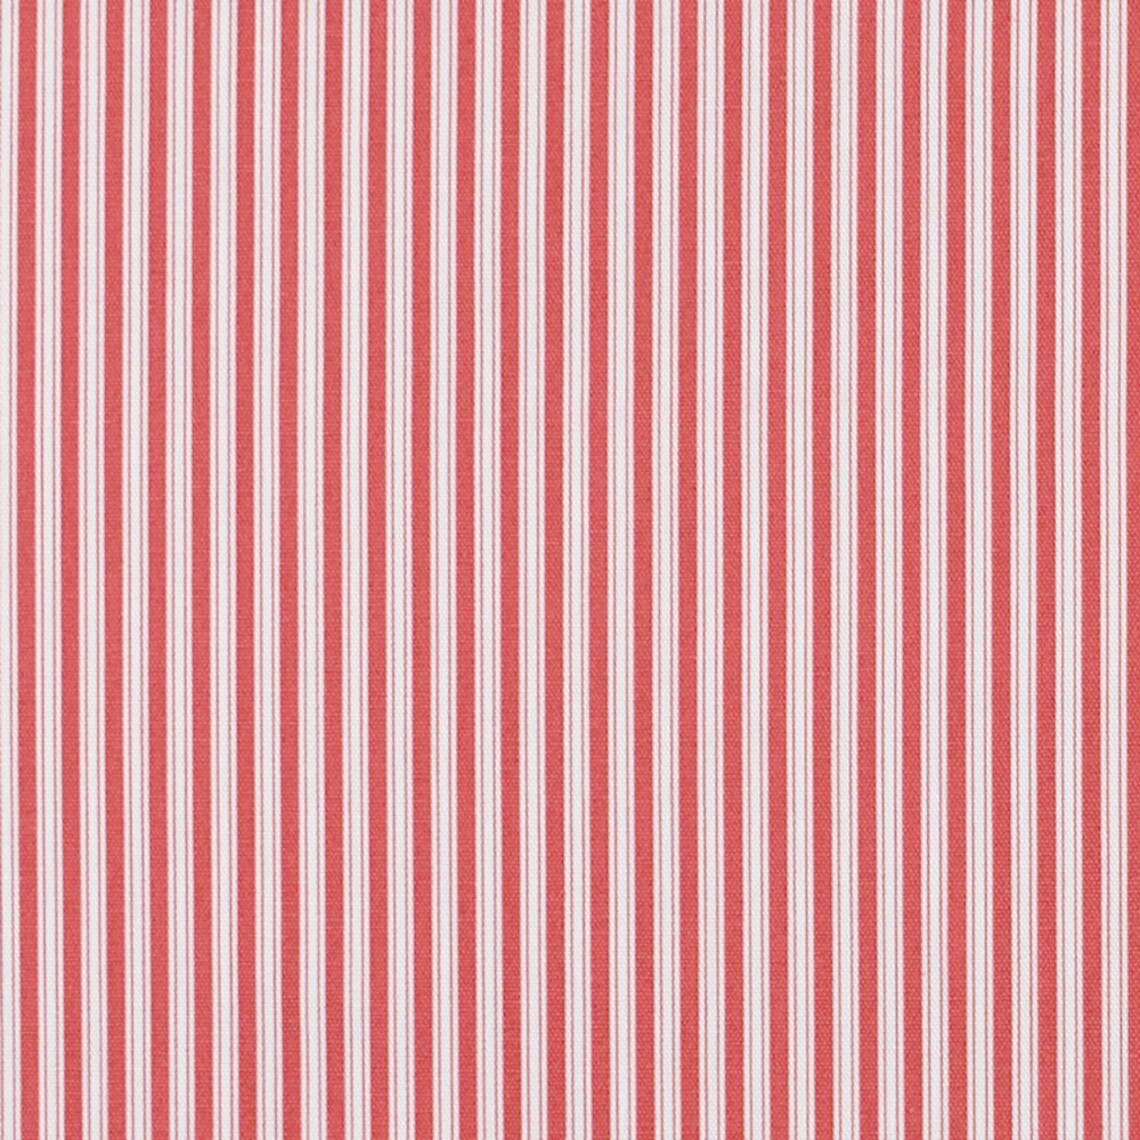 Decorative Pillows in Polo Calypso Rose Red Stripe on Off-White